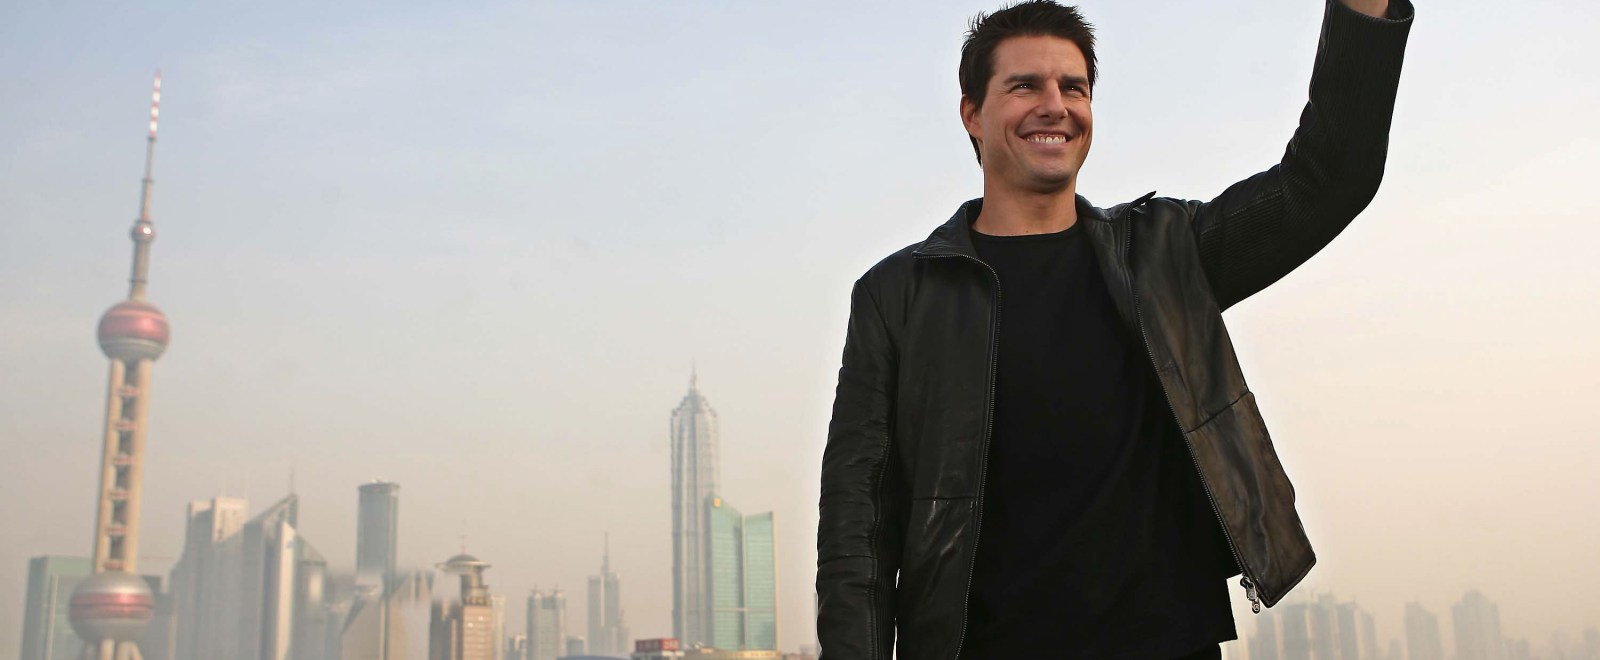 Tom Cruise Films Mission Impossible III In China